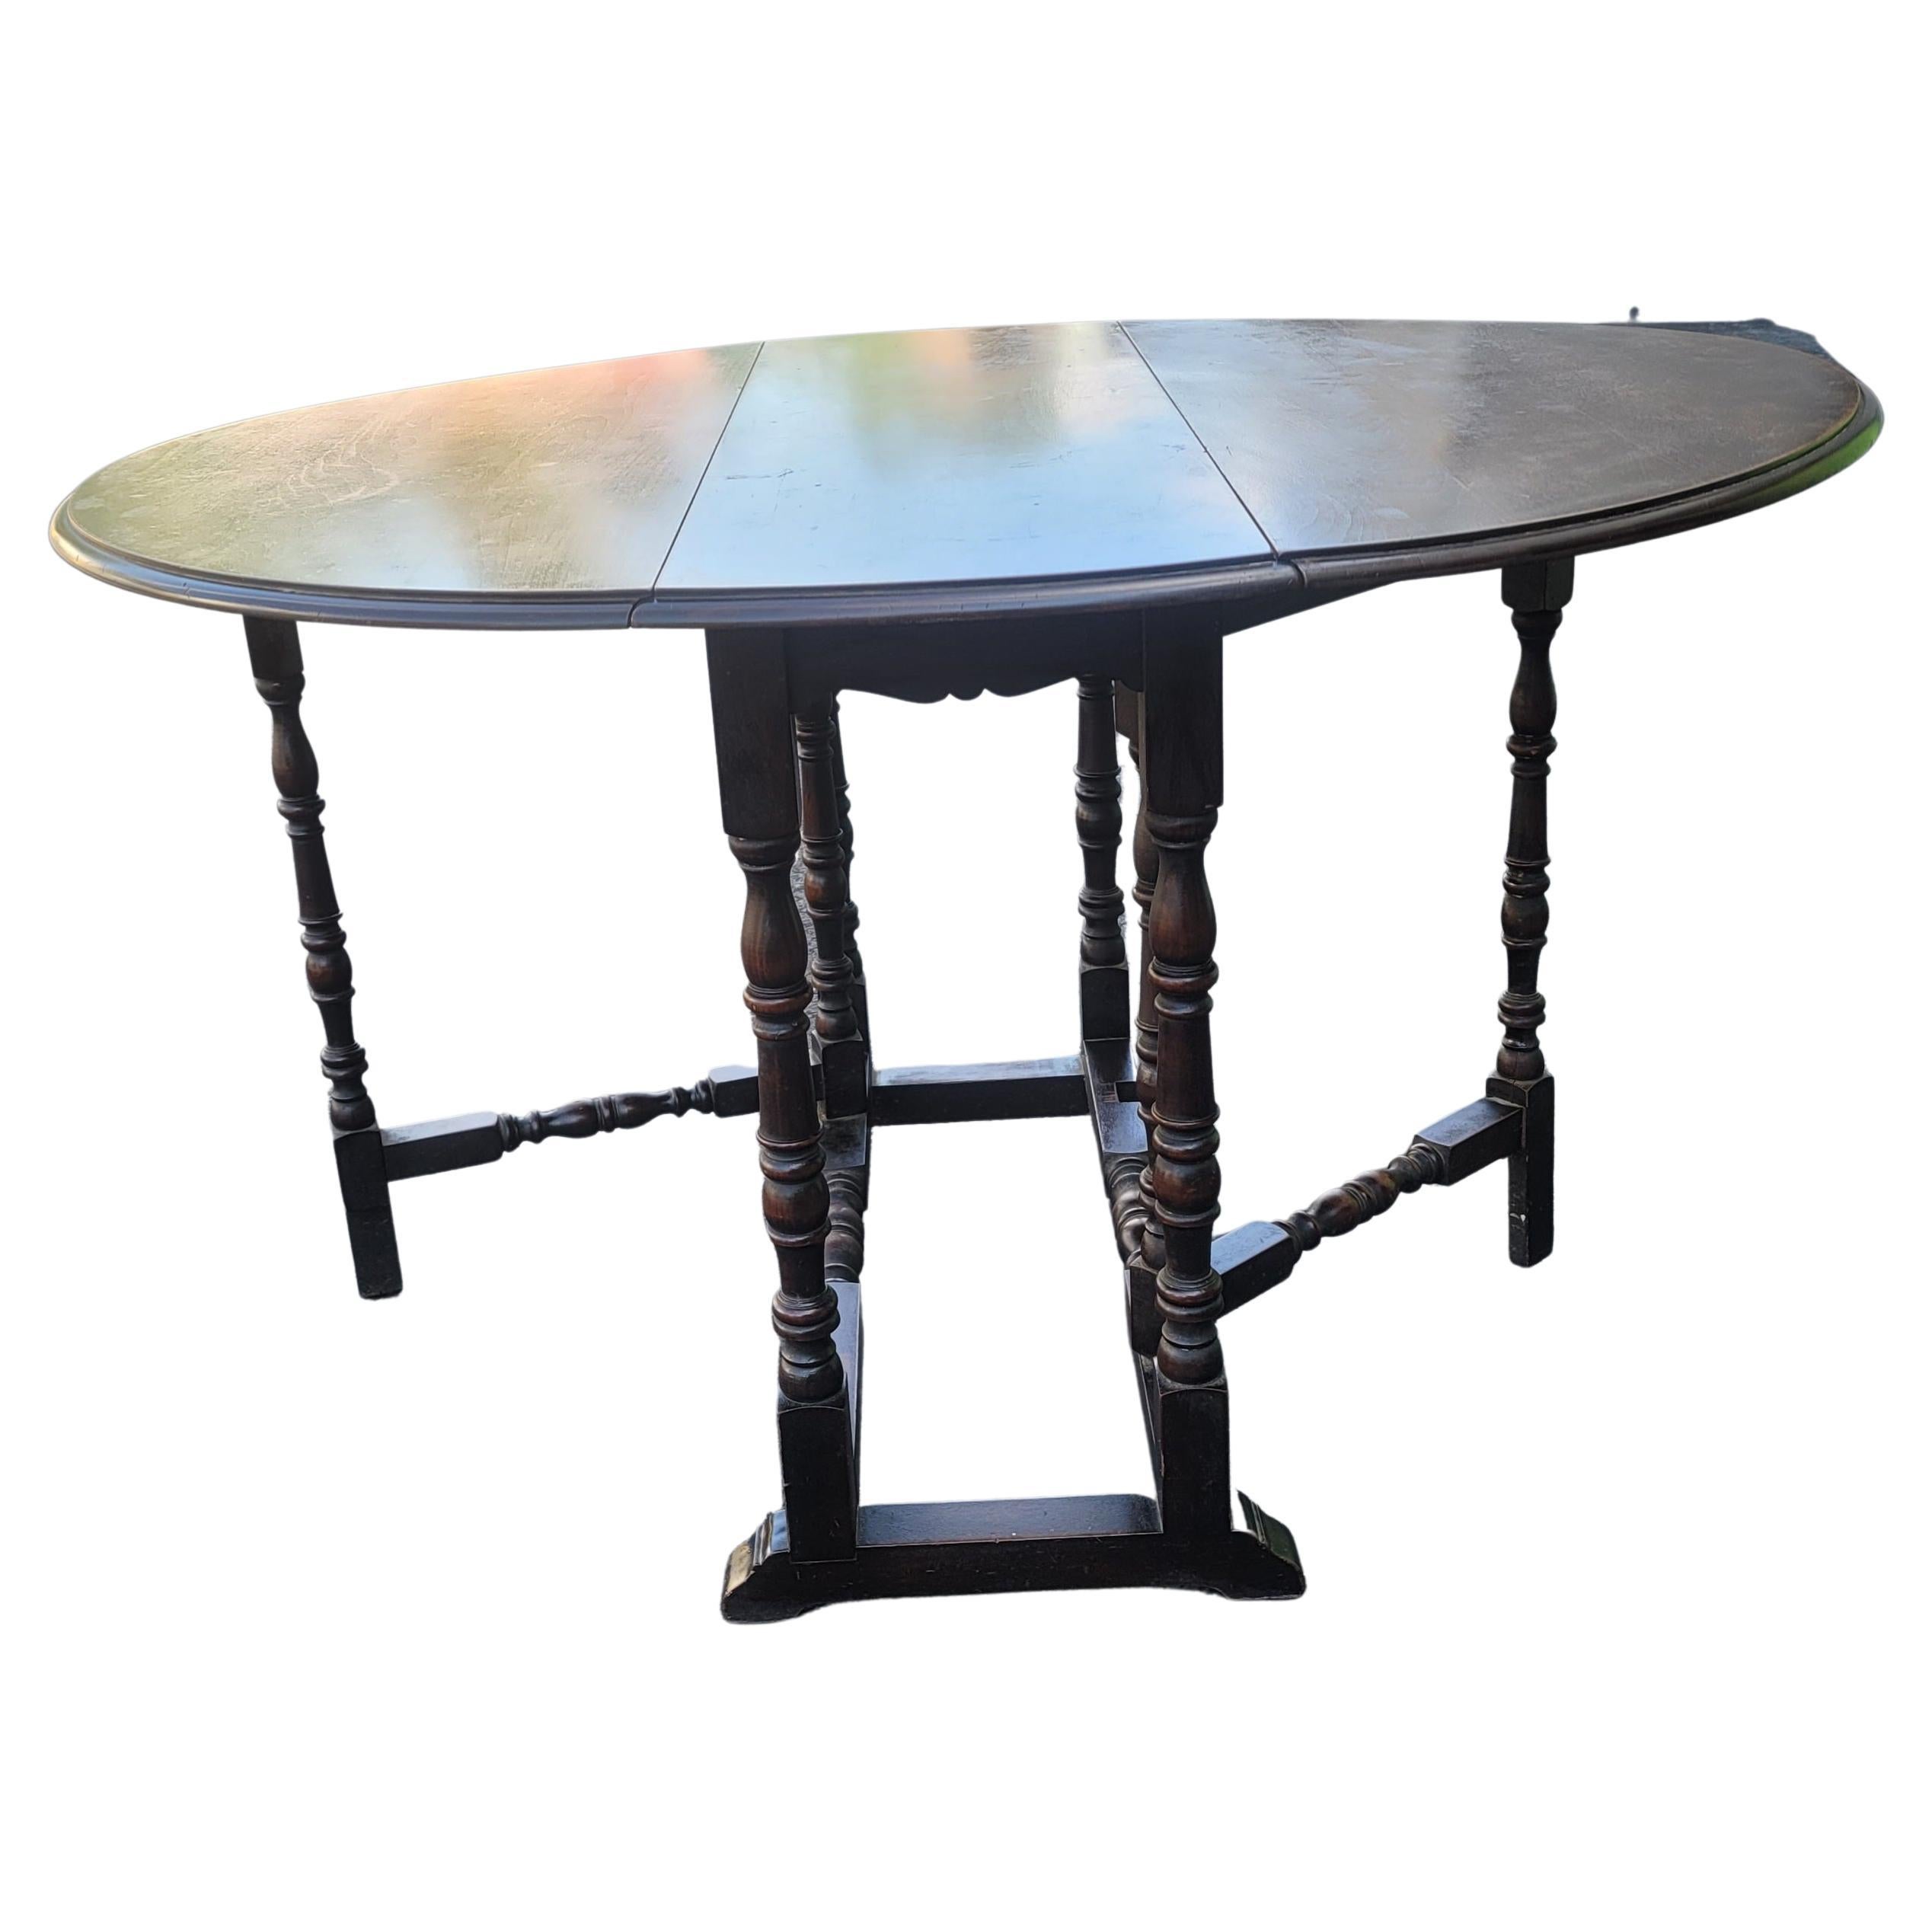 Antique Walnut Gatelegs Oval Table, Circa 1910s In Good Condition For Sale In Germantown, MD